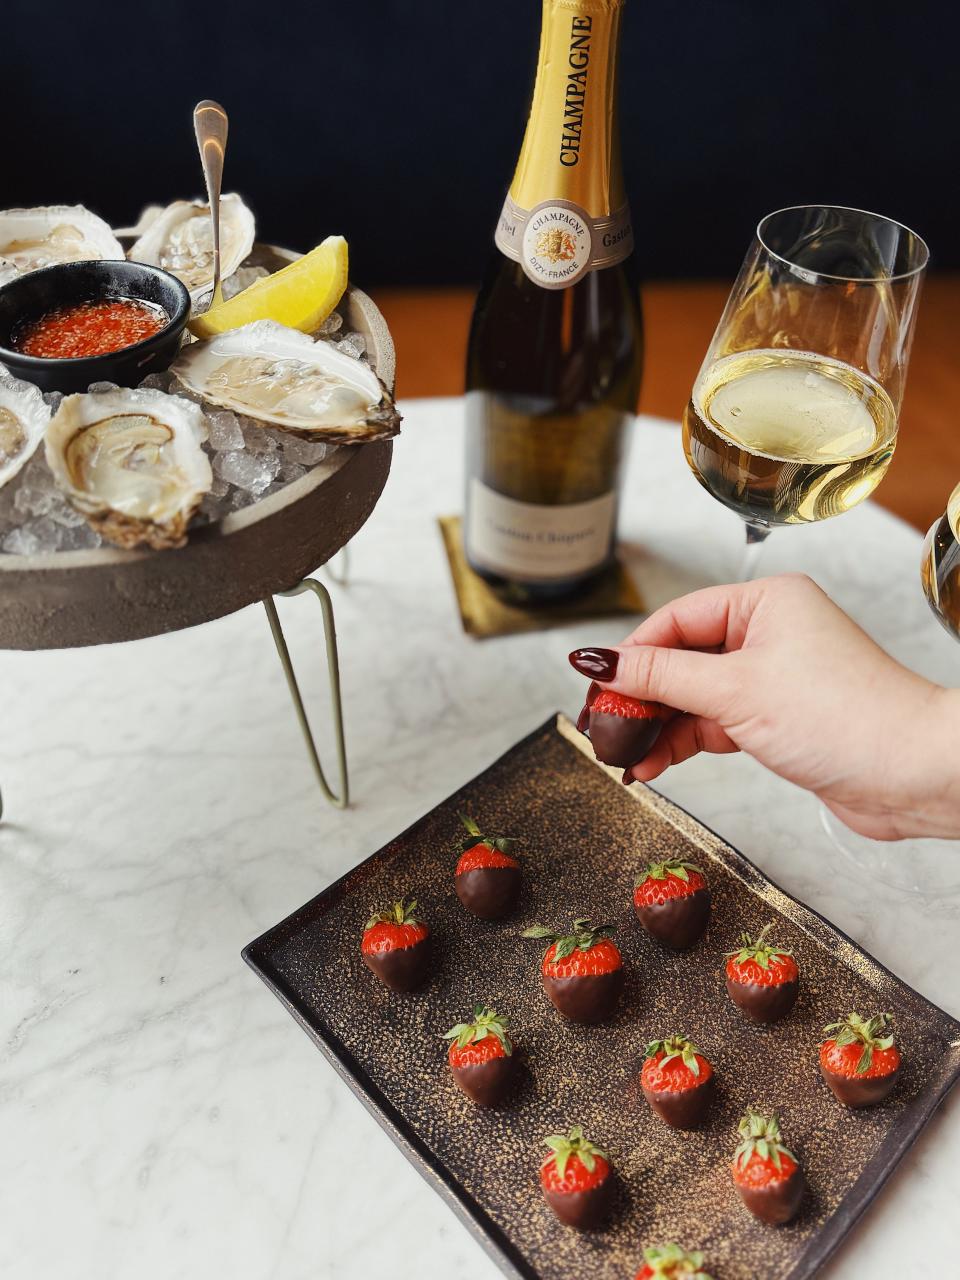 Oysters, chocolate covered strawberries and champagne offered as part of the "Lover's Lounge" Valentine's Day celebration at Heirloom Kitchen at The St. Laurent.